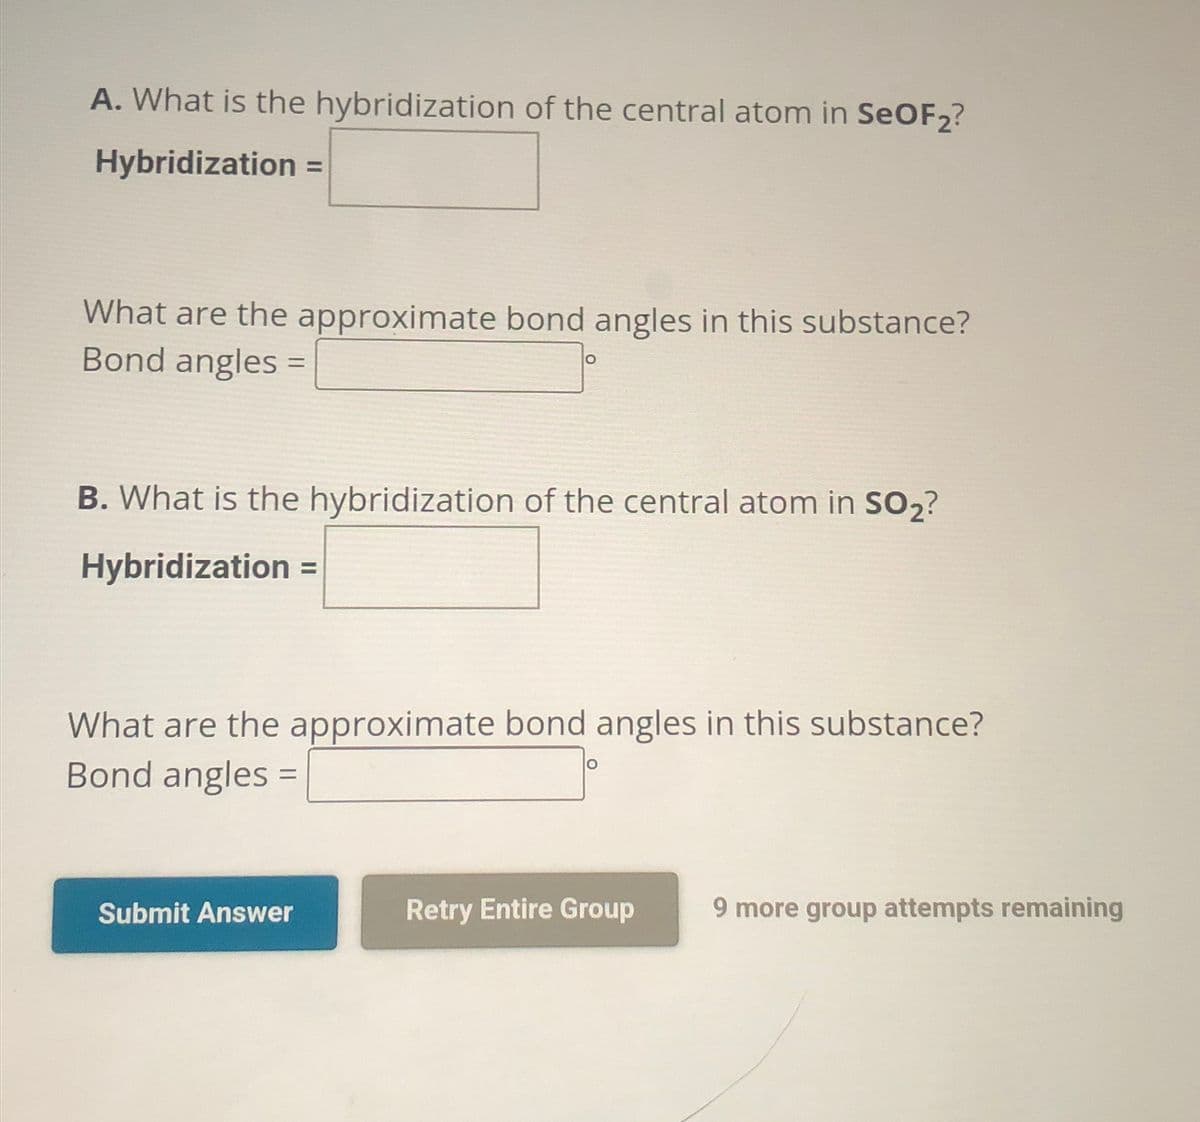 A. What is the hybridization of the central atom in SeOF2?
Hybridization =
What are the approximate bond angles in this substance?
Bond angles =
O
B. What is the hybridization of the central atom in SO₂?
Hybridization =
What are the approximate bond angles in this substance?
Bond angles =
Submit Answer
Retry Entire Group
9 more group attempts remaining